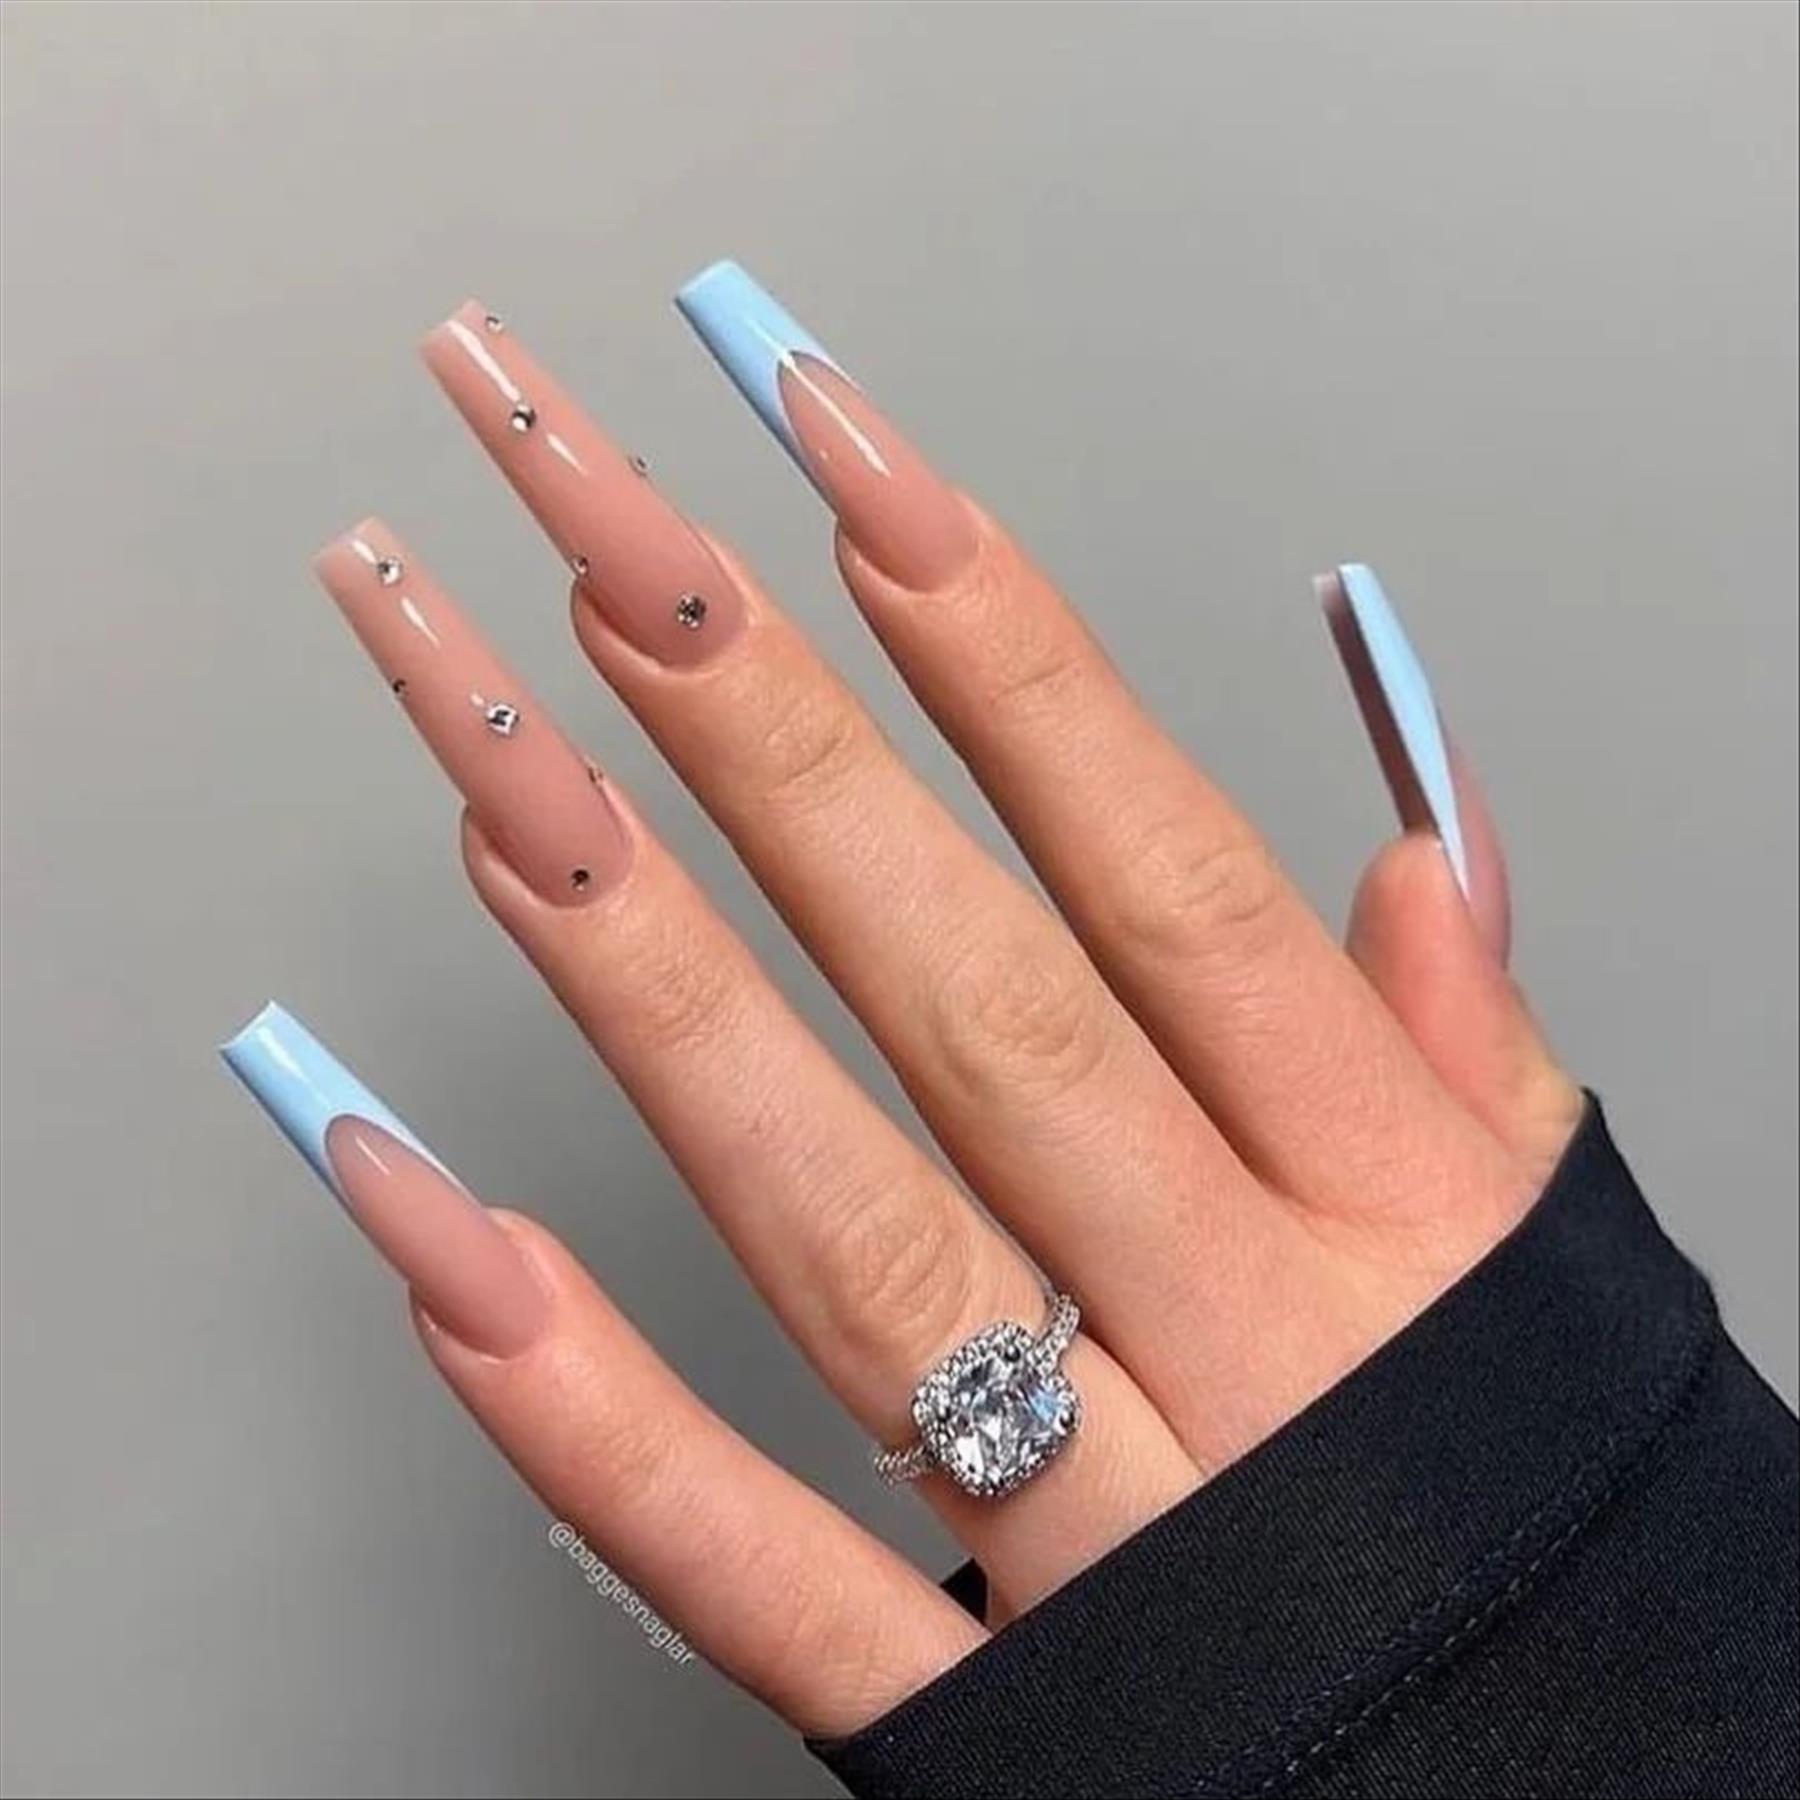 Classic Summer coffin nails acrylic prefect to wear